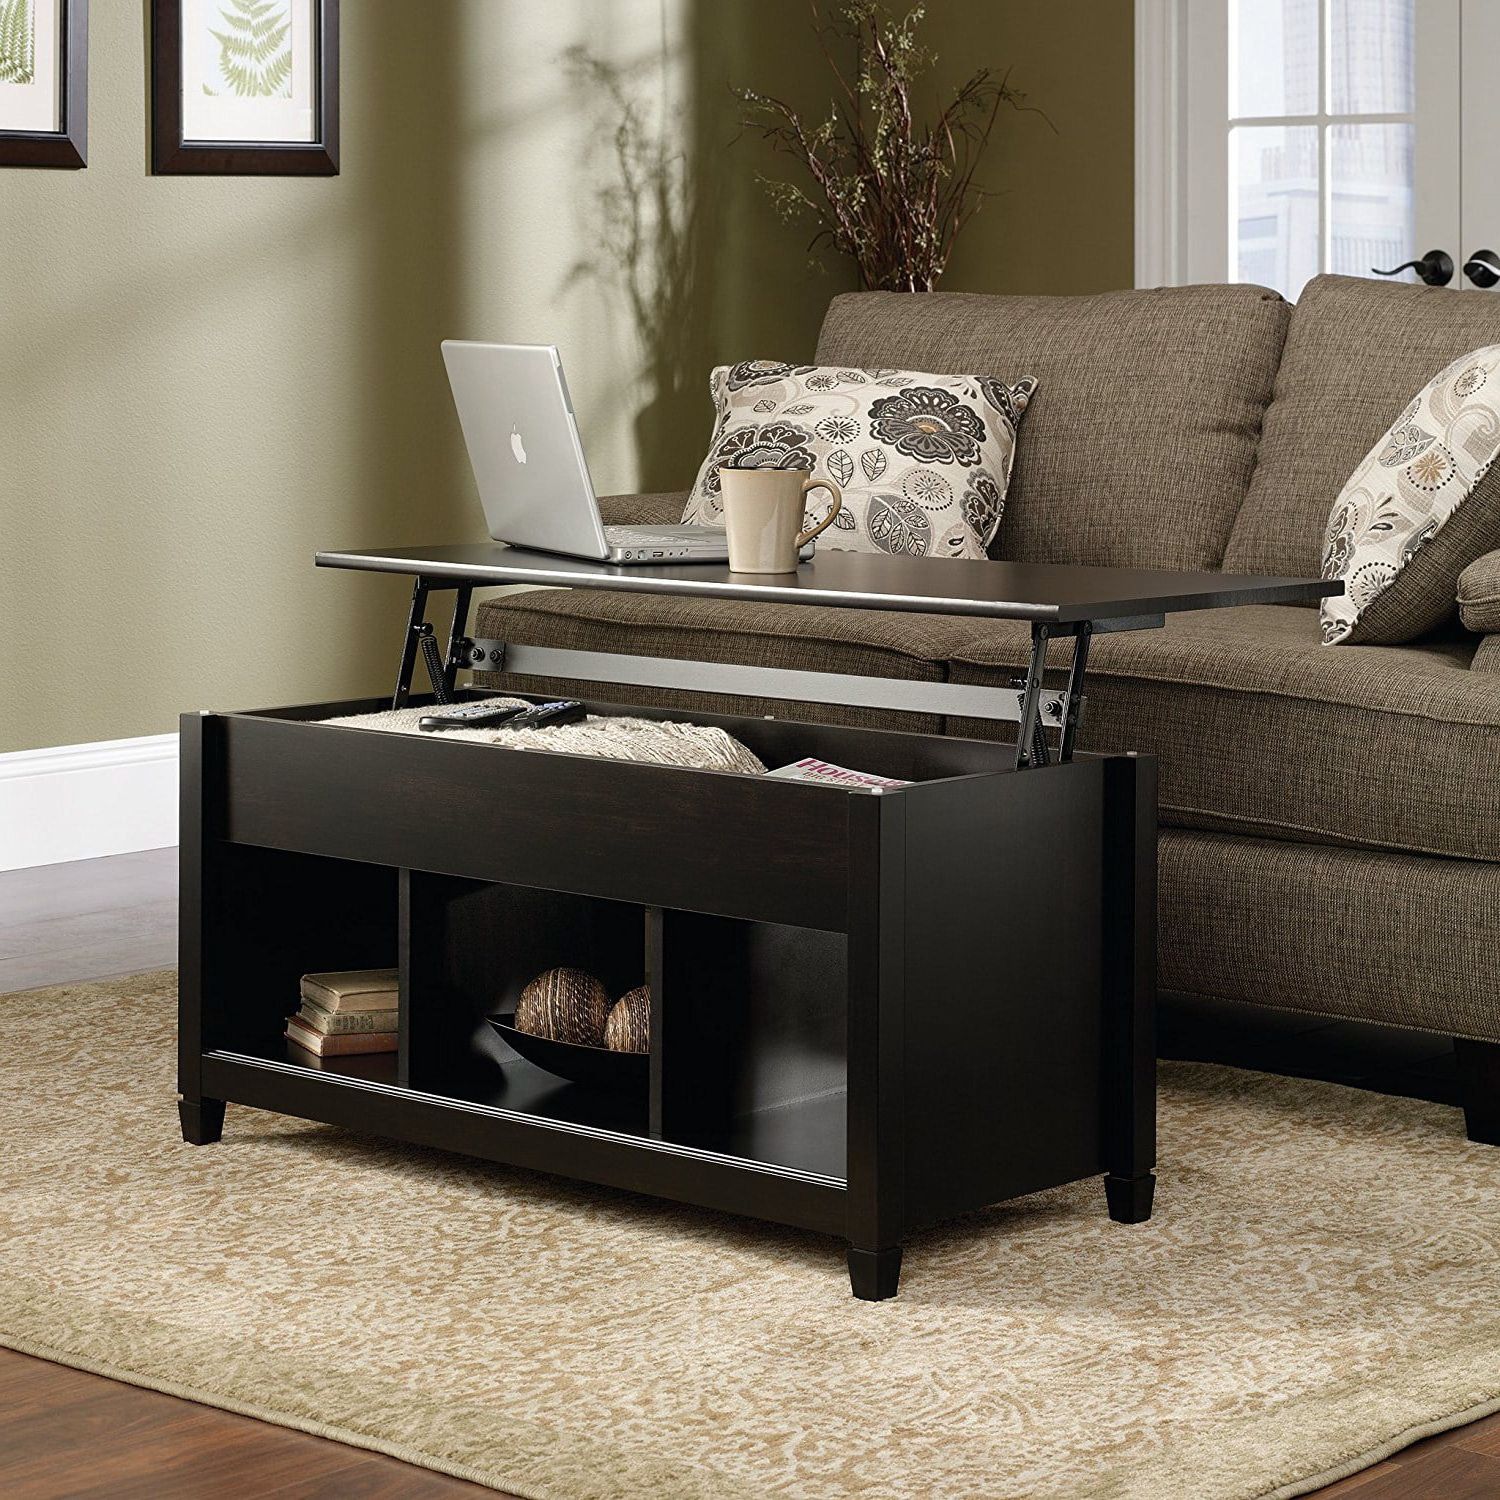 2019 Zimtown Lift Up Top Coffee Table With Hidden Compartment End Rectangle In Lift Top Coffee Tables With Hidden Storage Compartments (Photo 5 of 15)